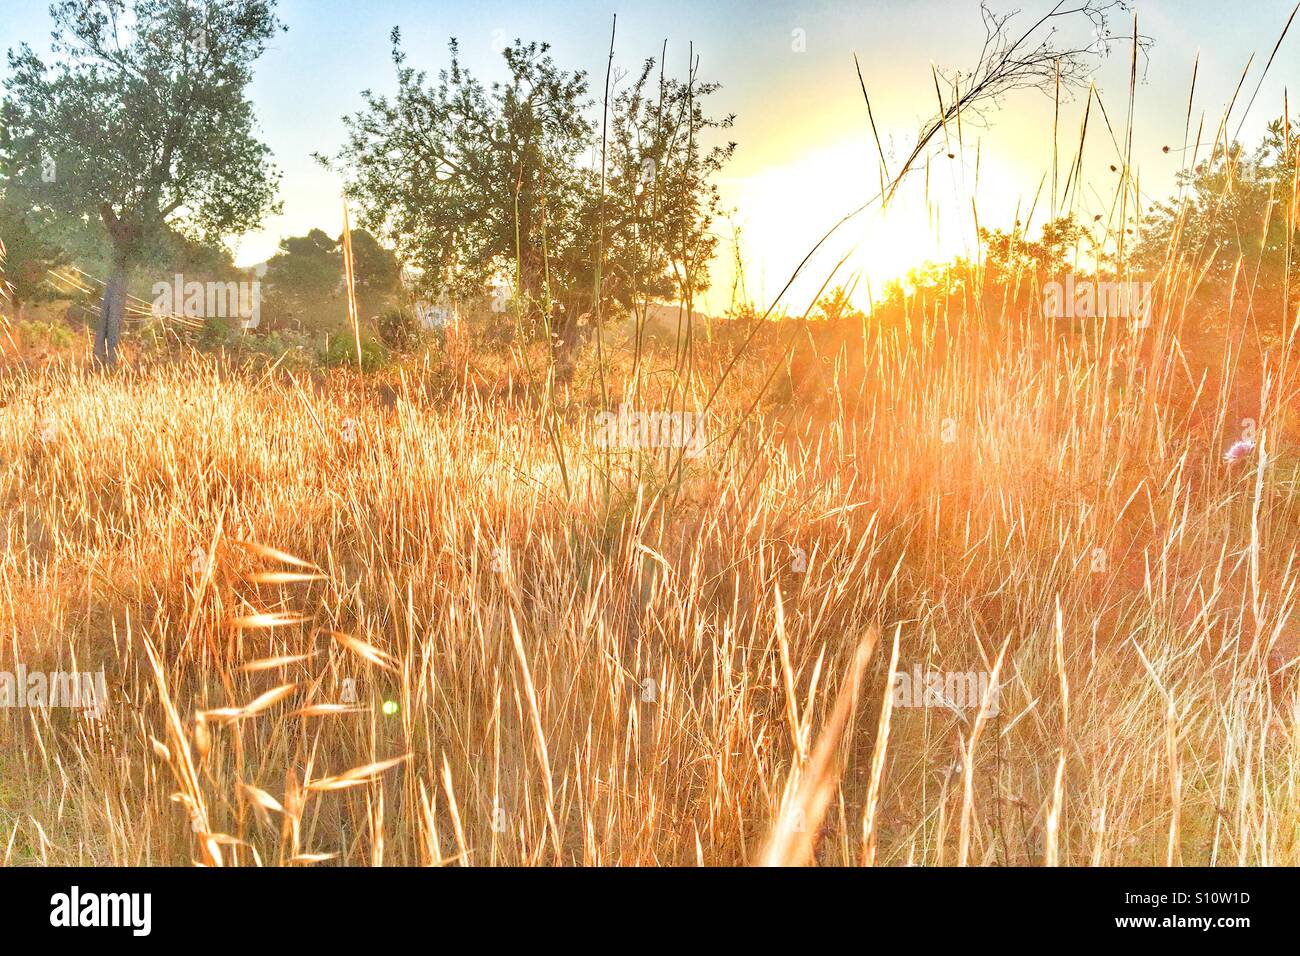 Golden hour morning on a field Stock Photo